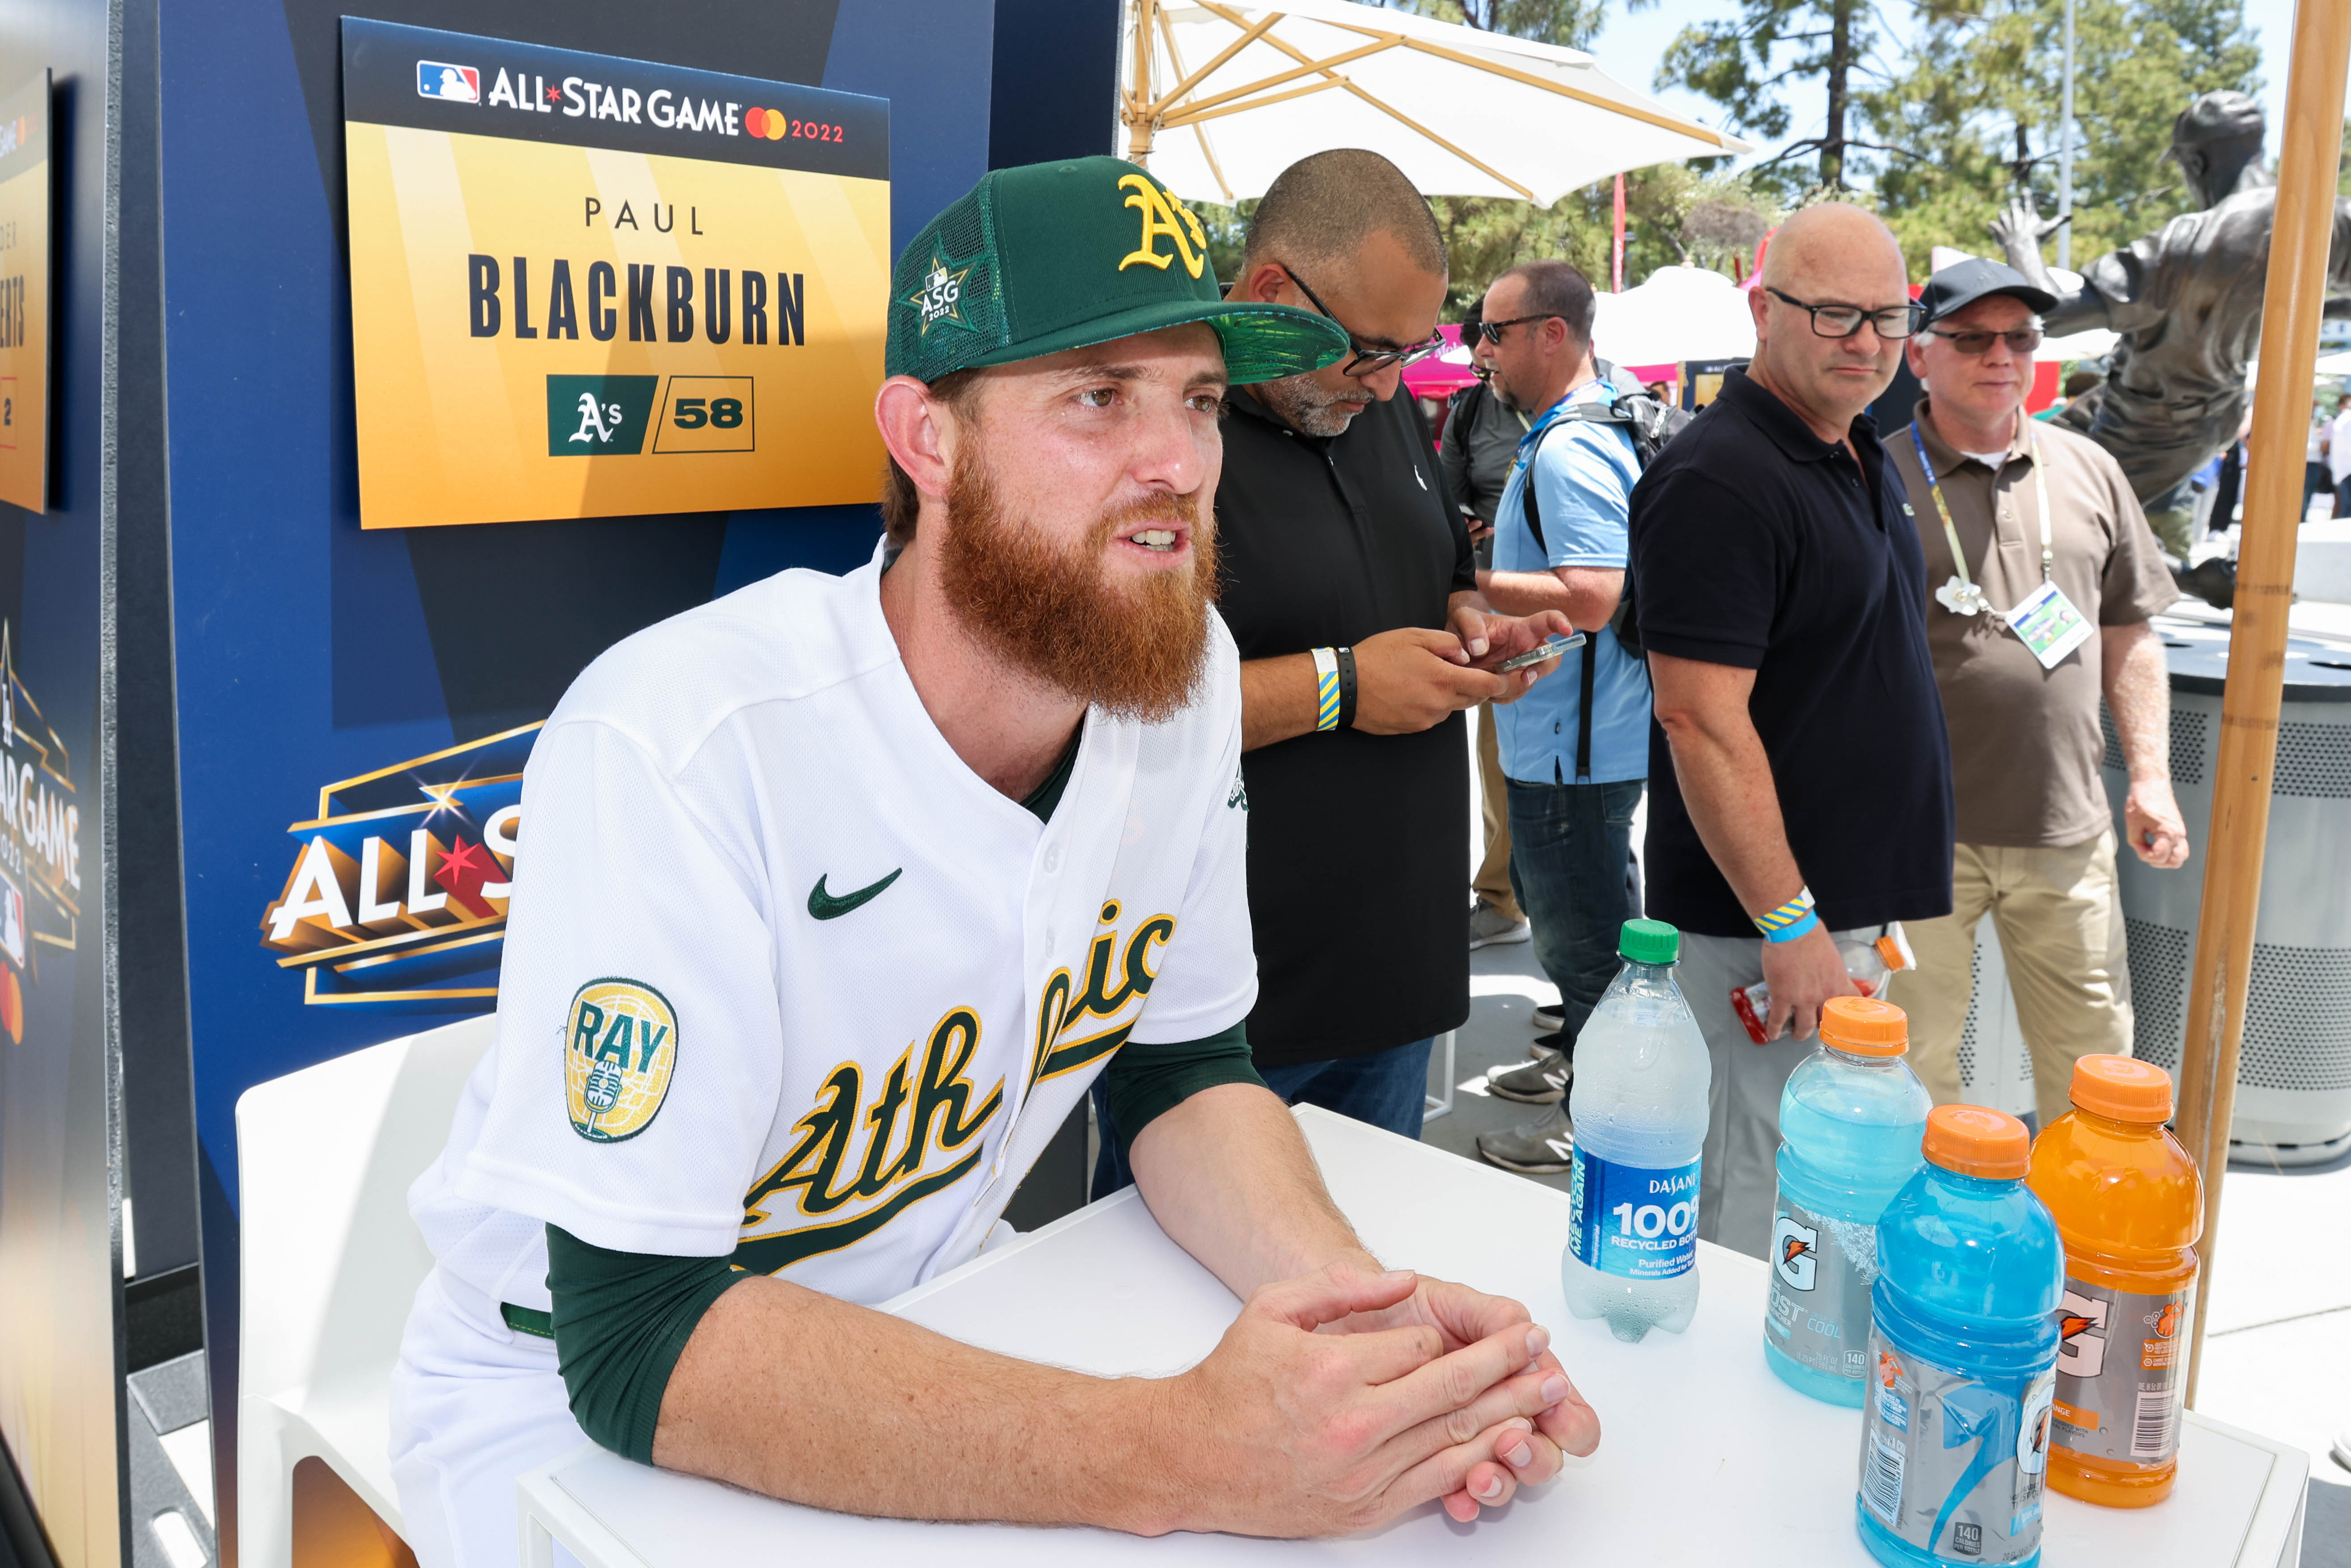 The Oakland A's allowed another team to fly their All-Star pitcher